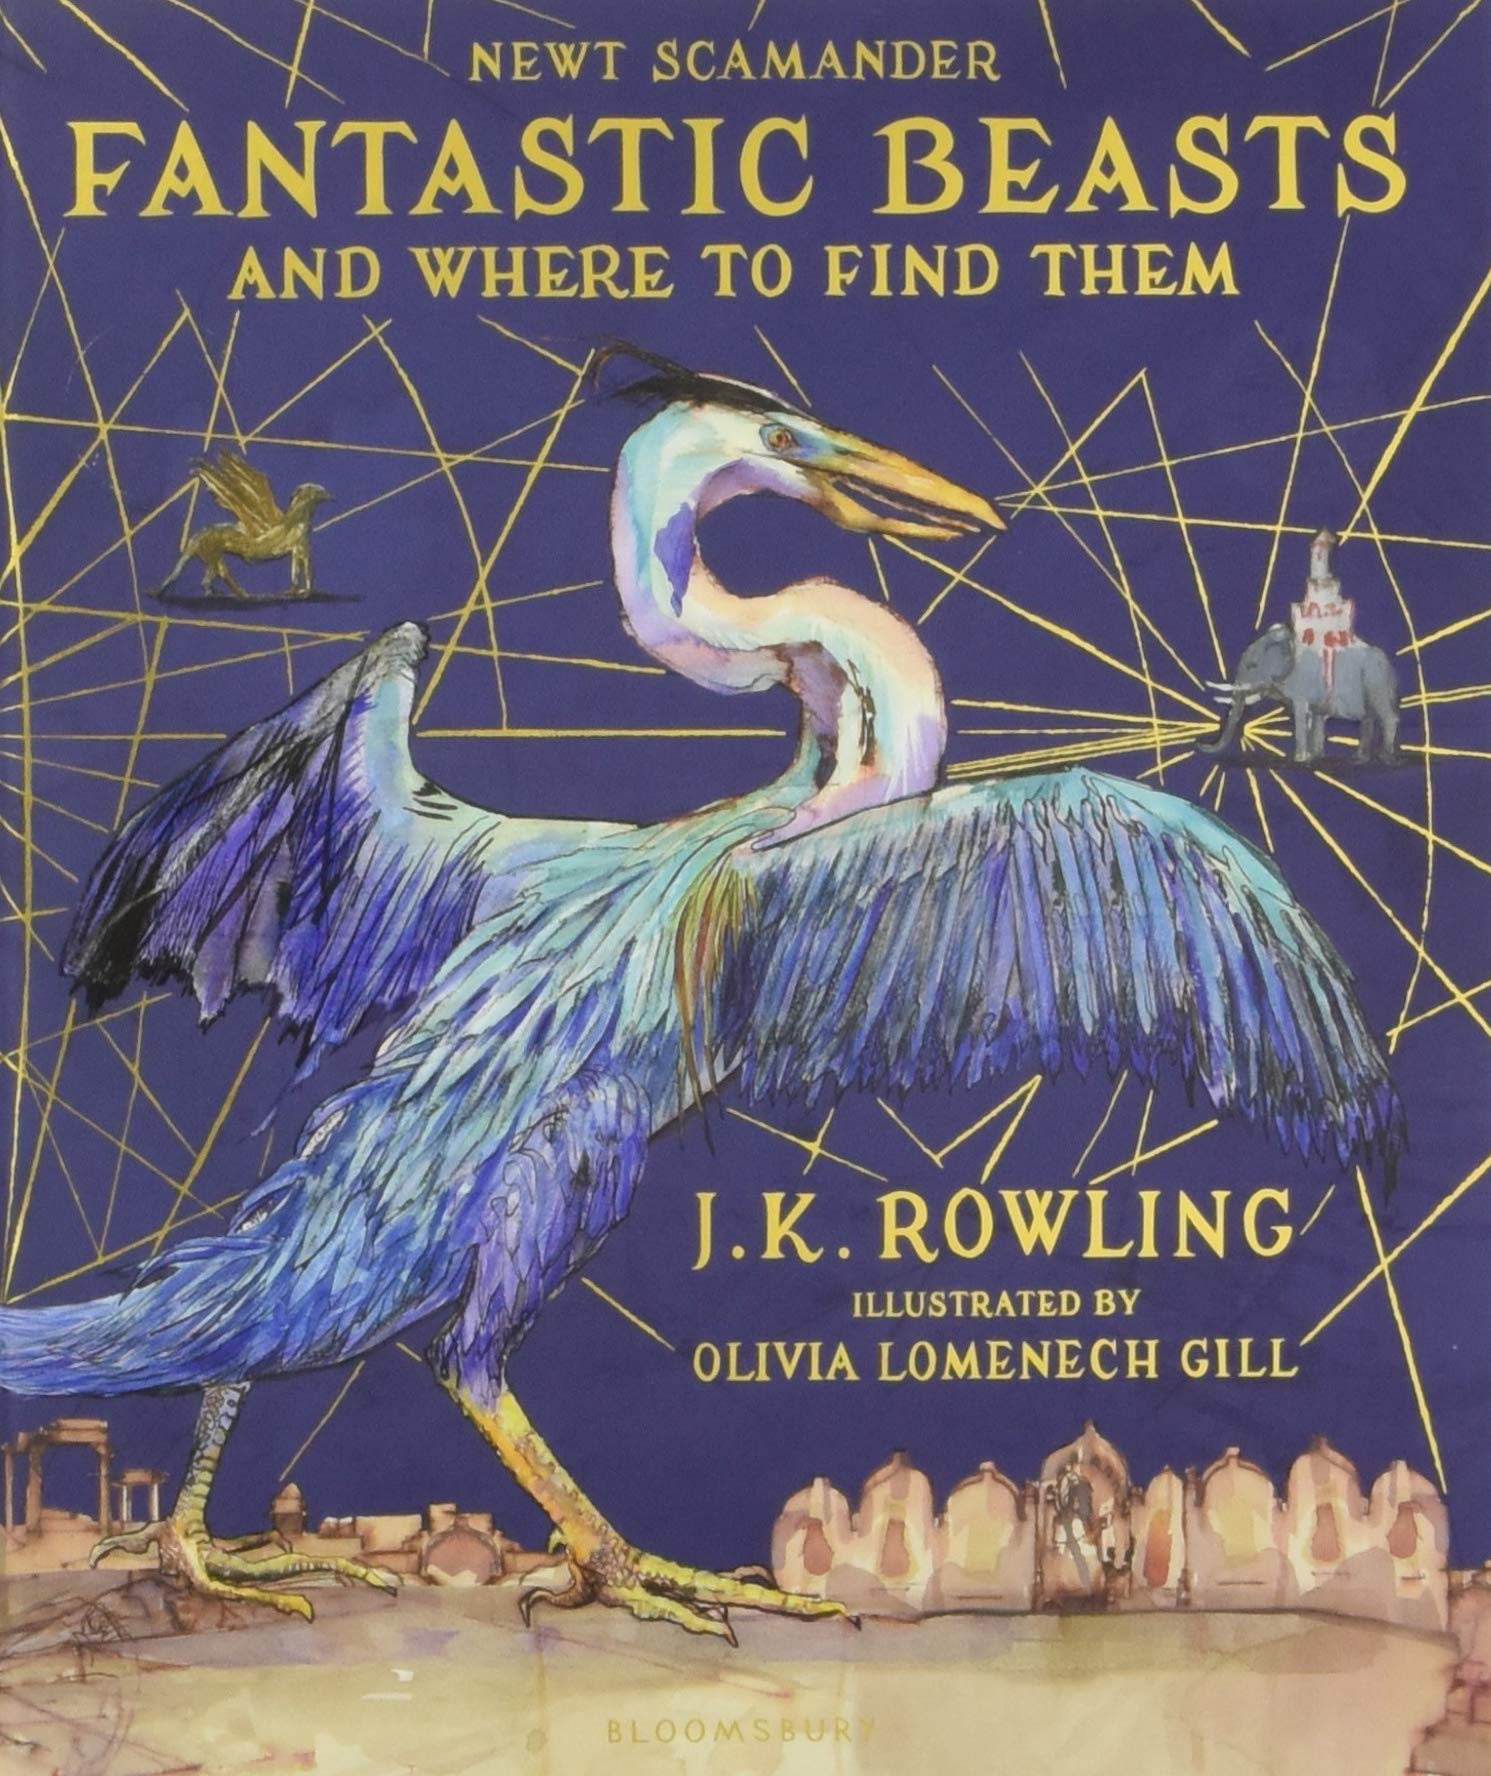 Fantastic Beasts and Where to Find Them (Illustrated Edition) / Фантастические твари и где они обитают